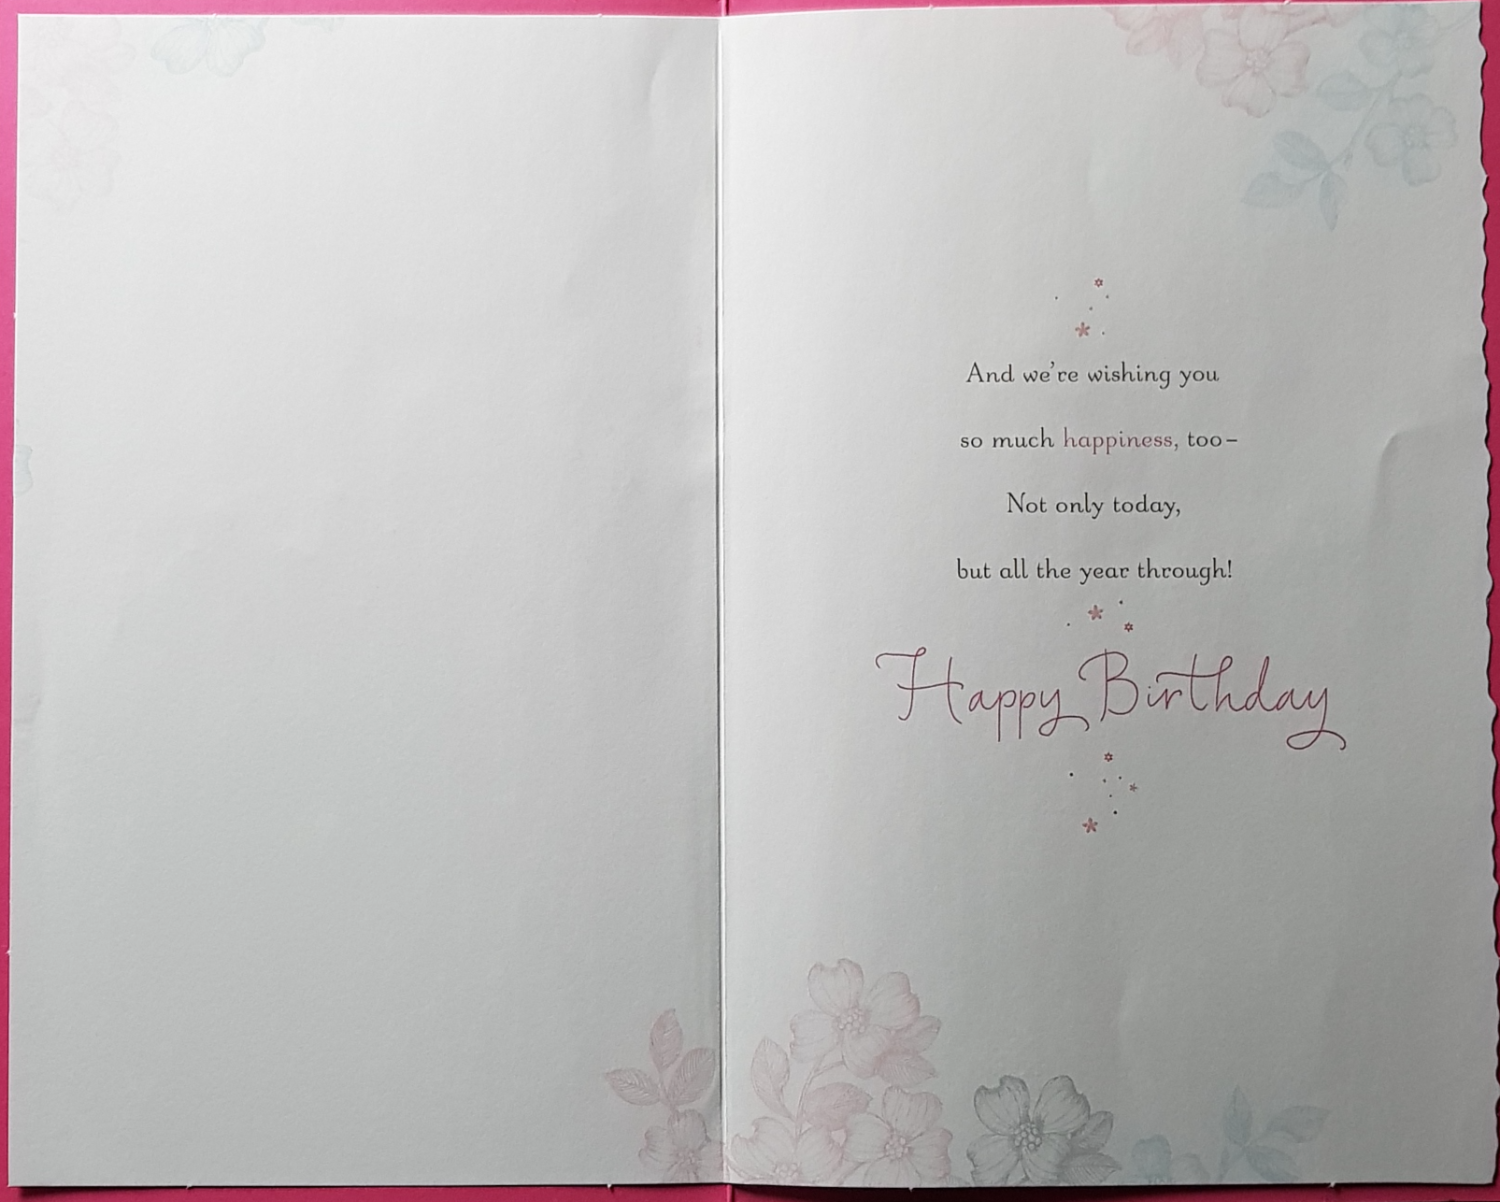 Birthday Card - General Female / Our Wish For You On Your Birthday